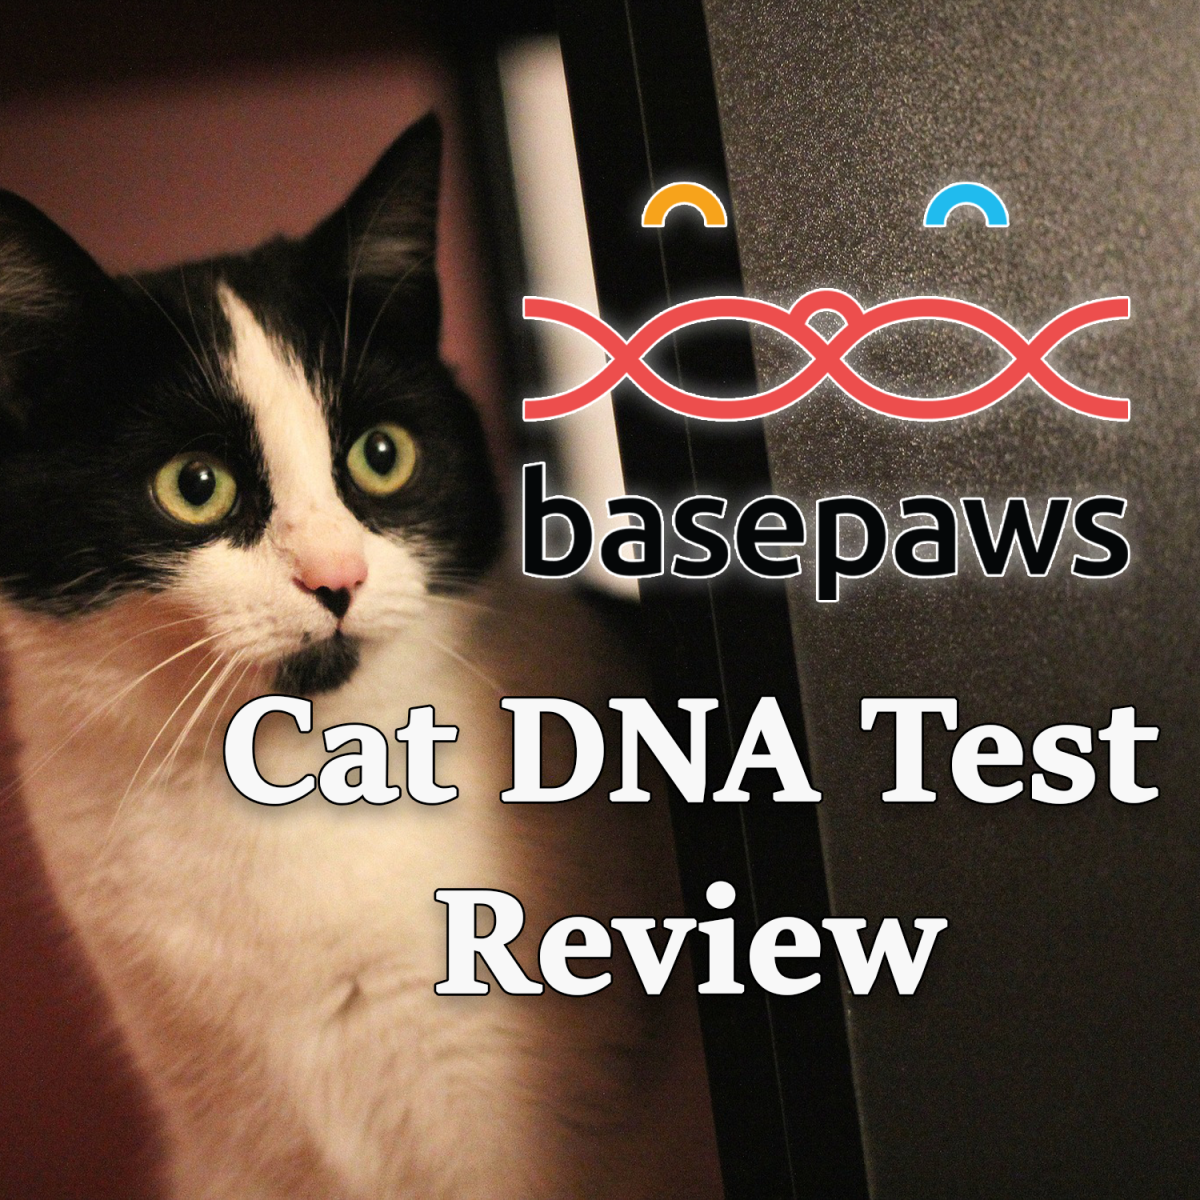 Basepaws Cat DNA Test Review